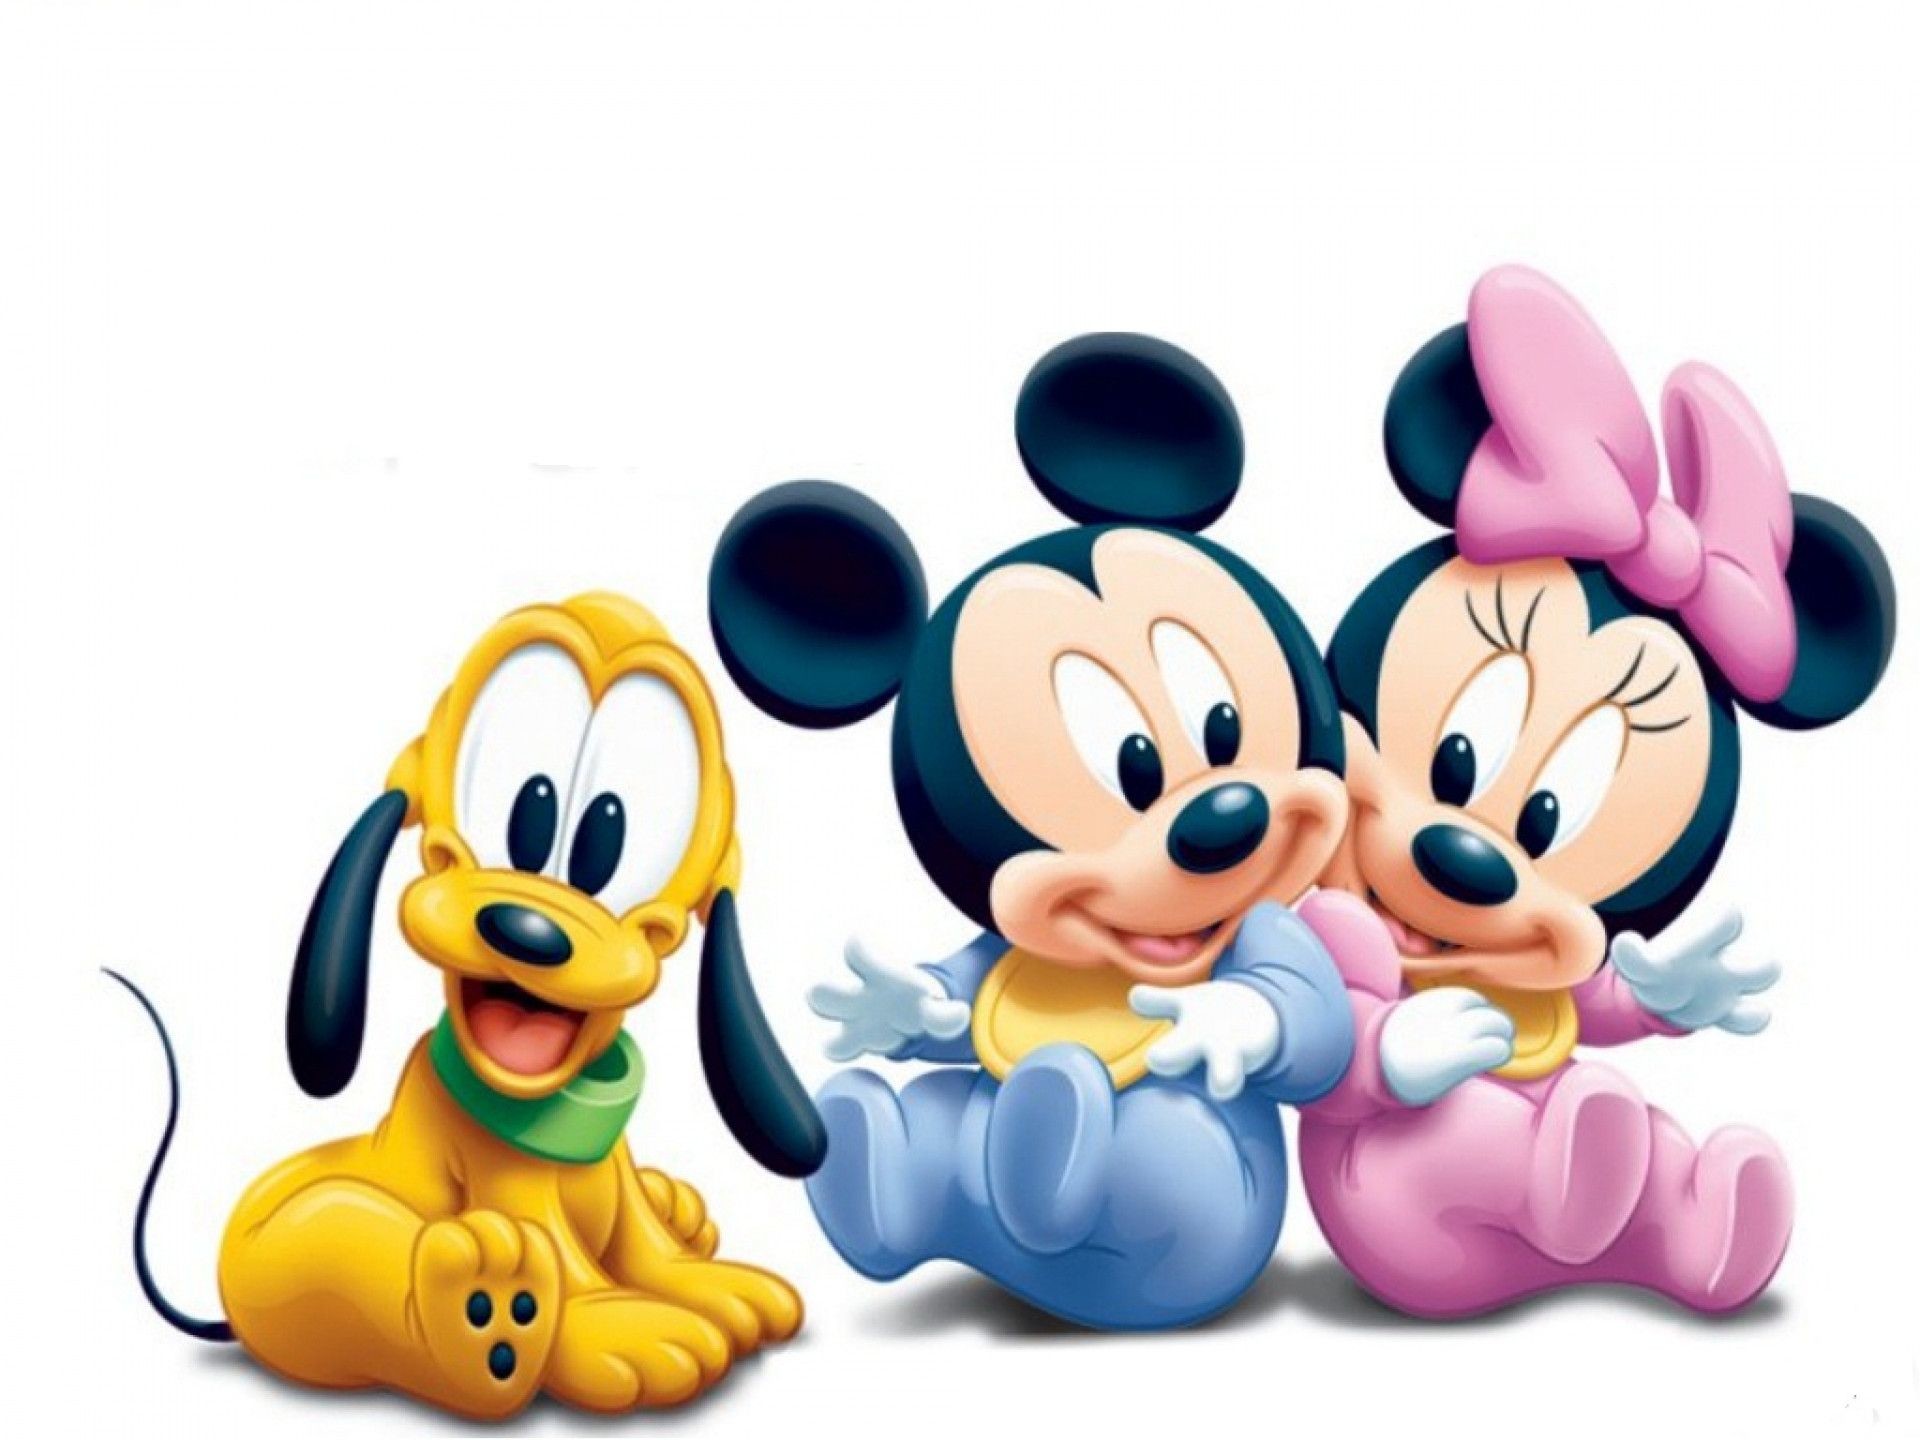 1920x1440 Clara Daisy Dale Donald Duck Goofy Mickey Minnie Mouse Pluto Wallpapers  Mickey And Minnie Mouse Wallpapers)